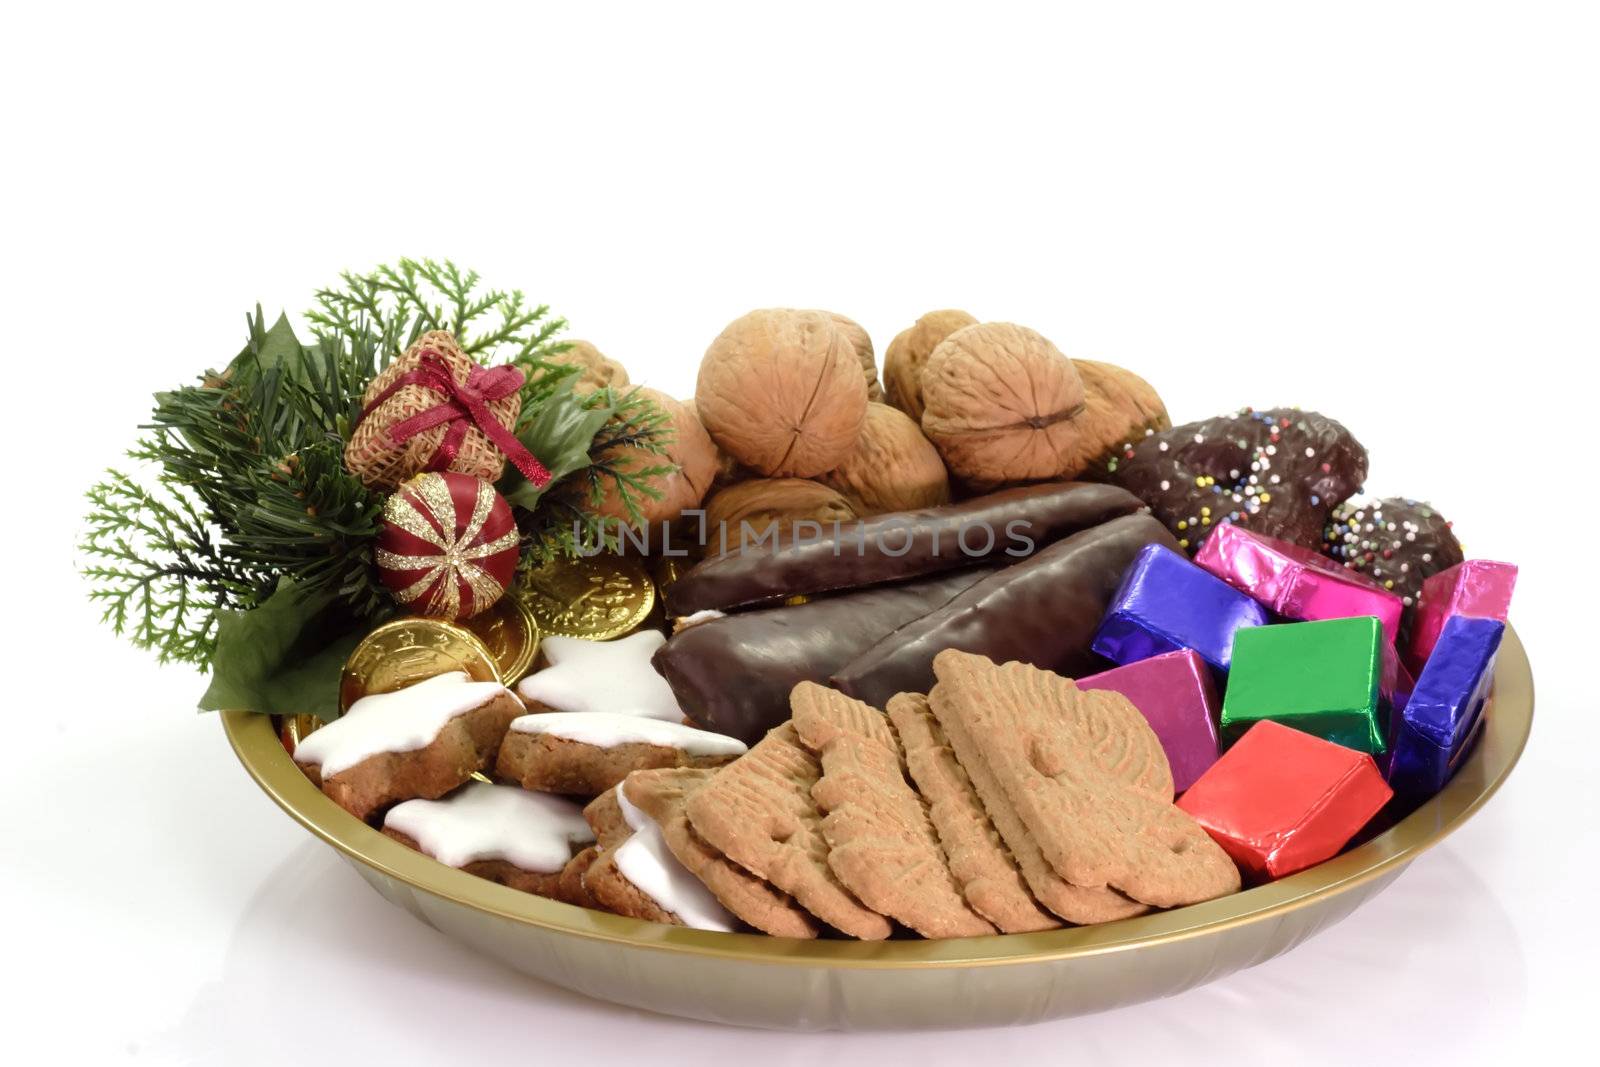 Plate of Christmas Goodies by Teamarbeit